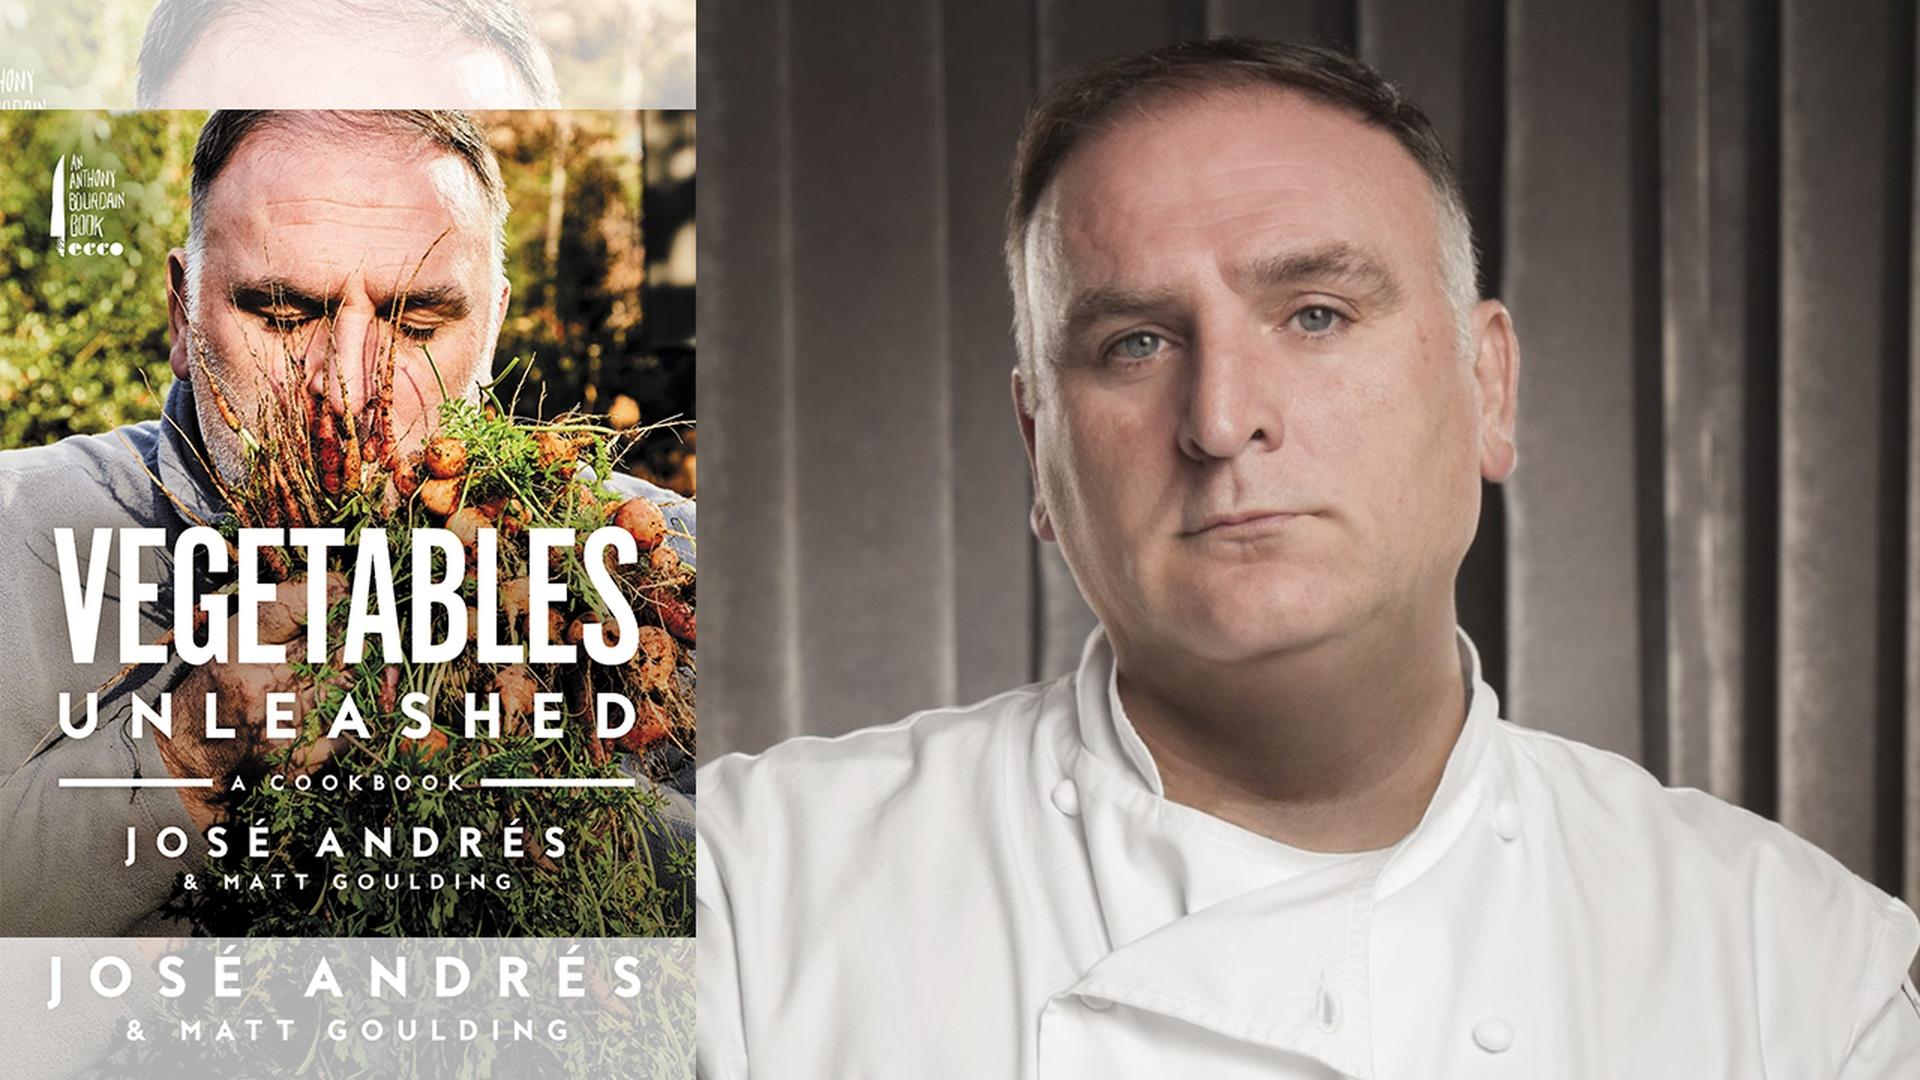 Jose Andres 2019 National Book Festival Book View Now Programs